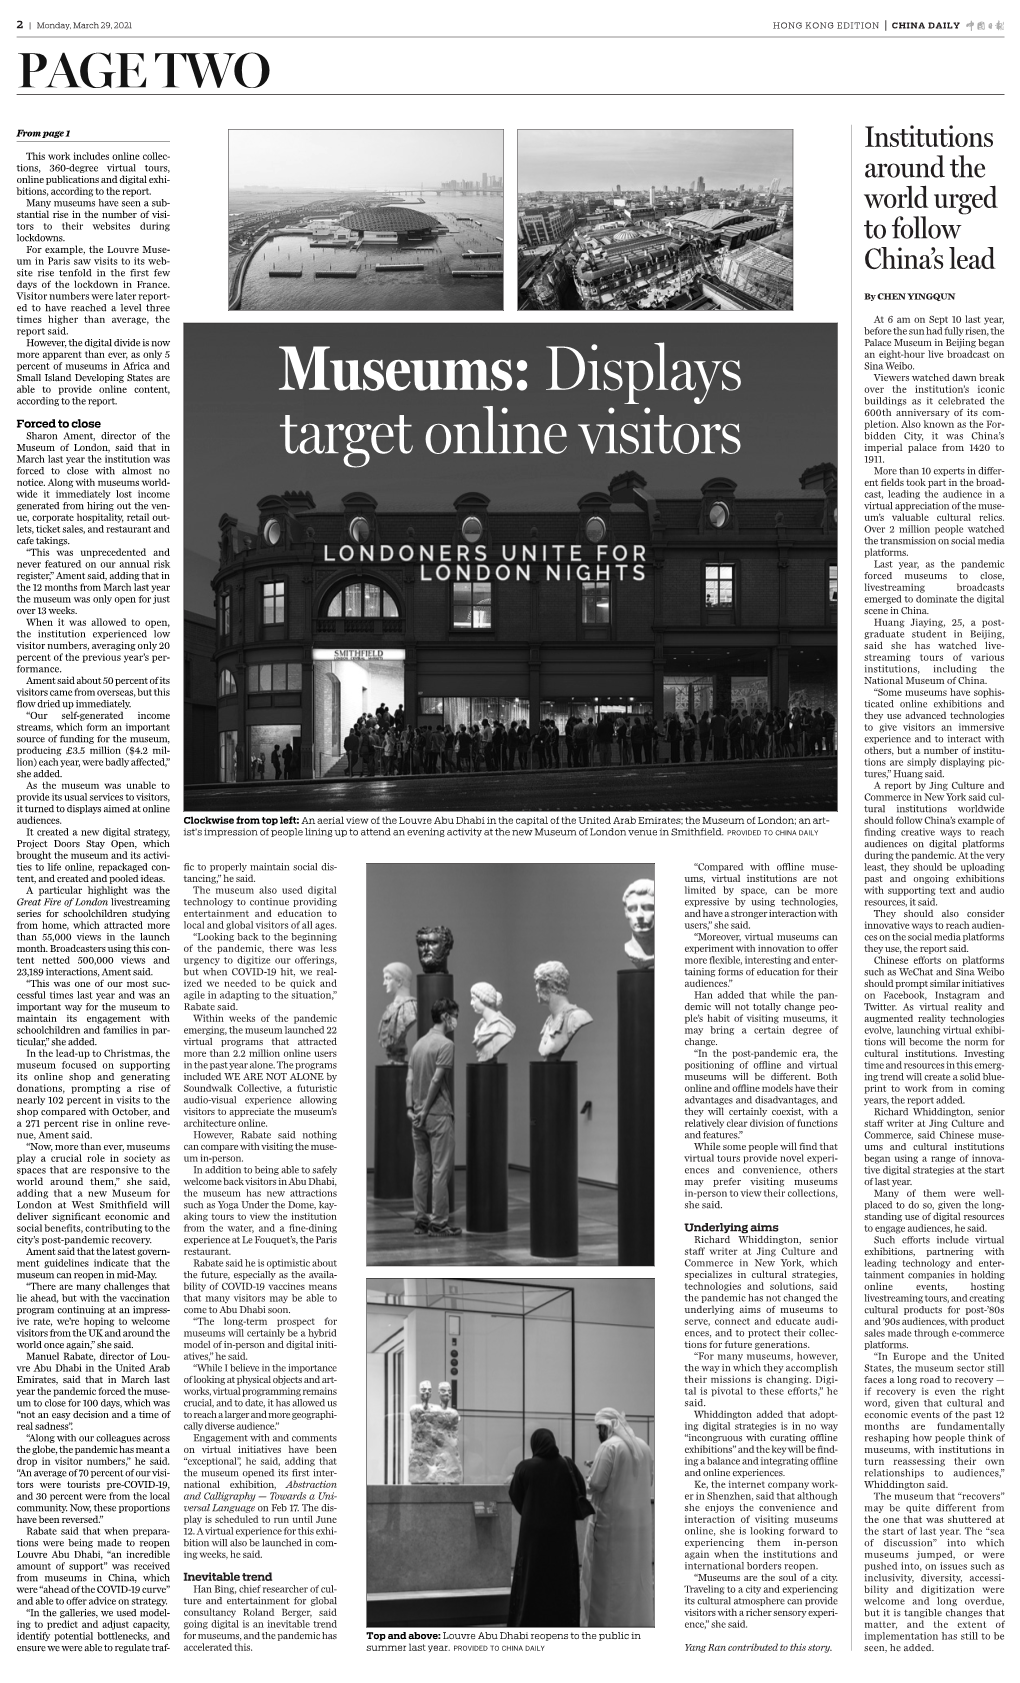 Museums Have Seen a Sub­ Stantial Rise in the Number of Visi­ World Urged Tors to Their Websites During Lockdowns